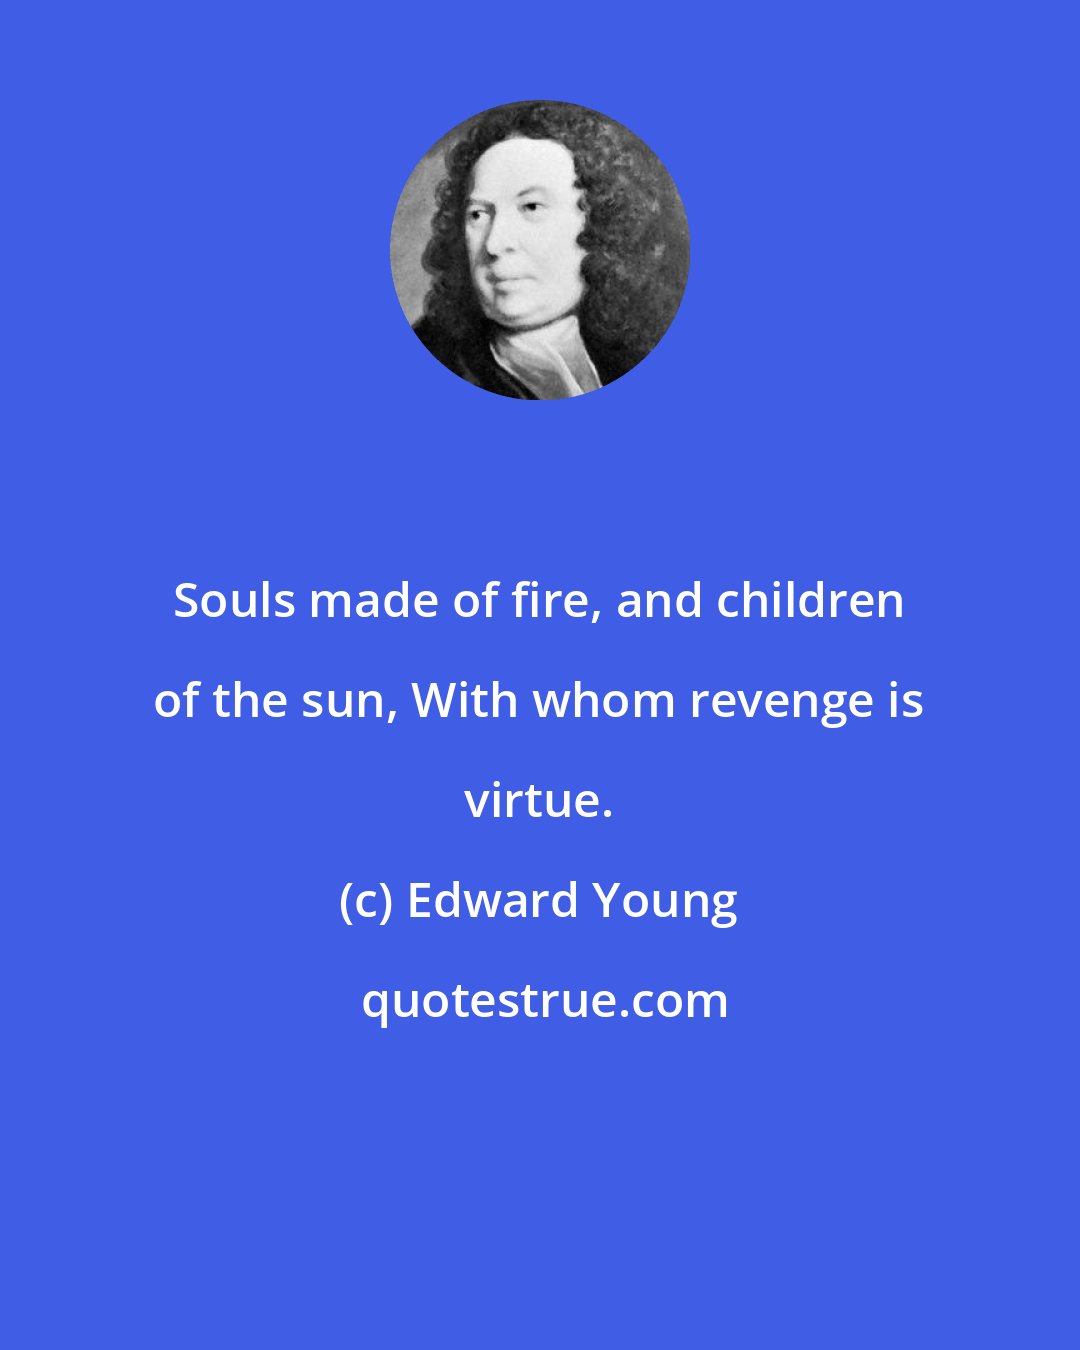 Edward Young: Souls made of fire, and children of the sun, With whom revenge is virtue.